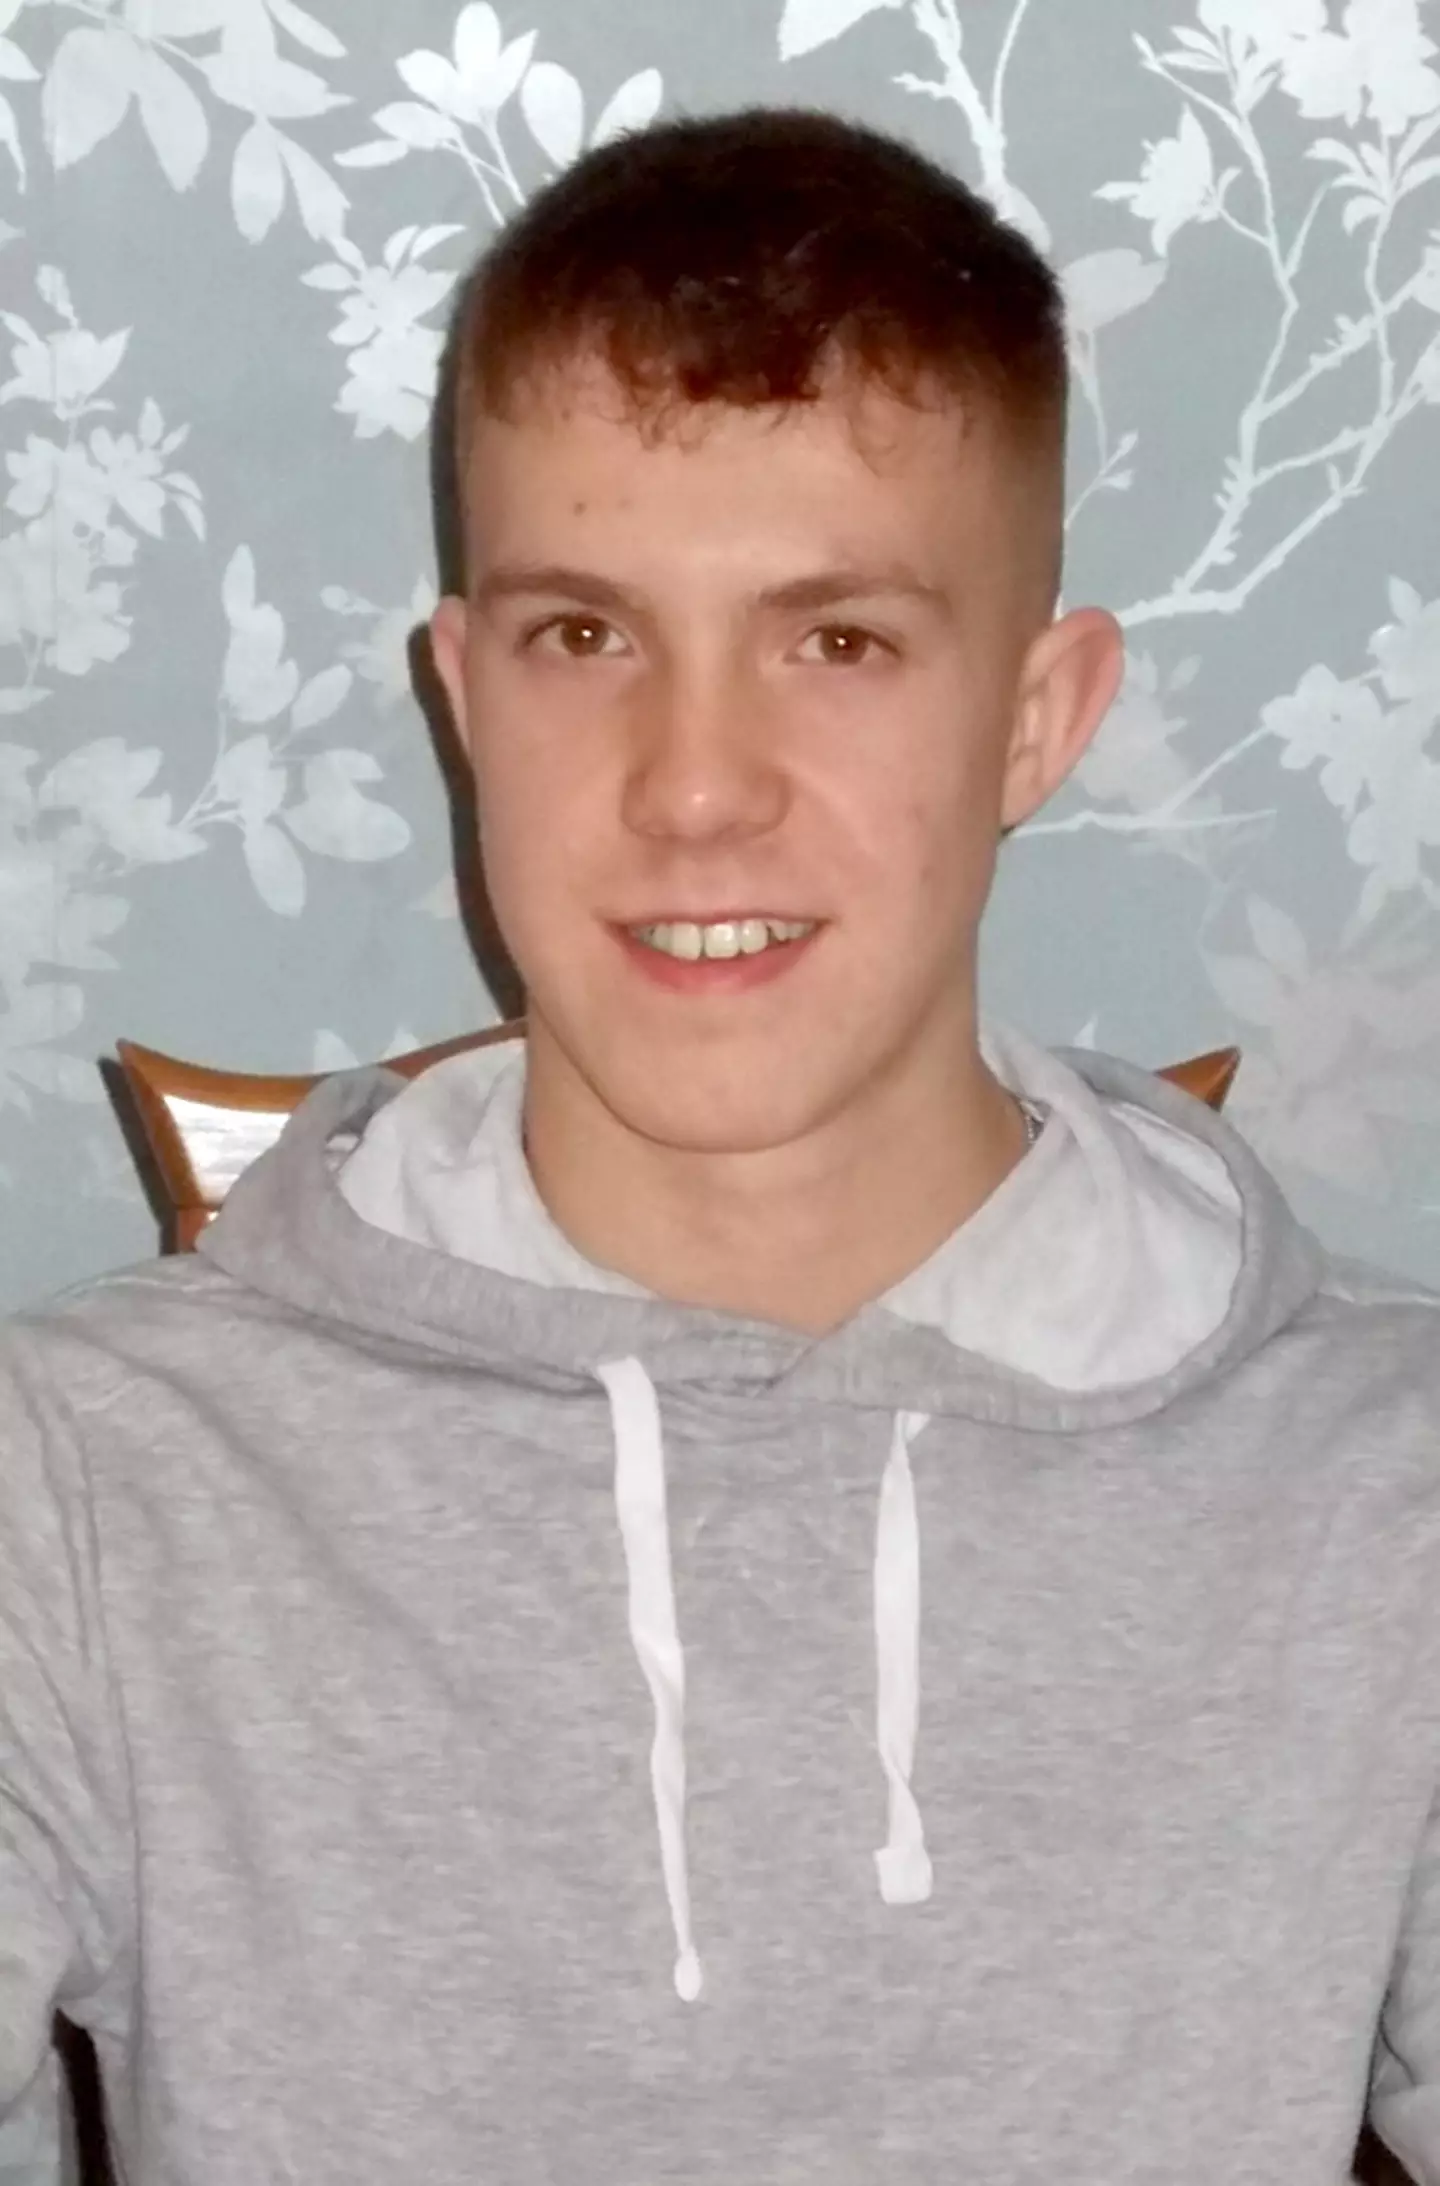 The family of 17-year-old Joe Abbess paid tribute to a 'wonderful son and brother'.